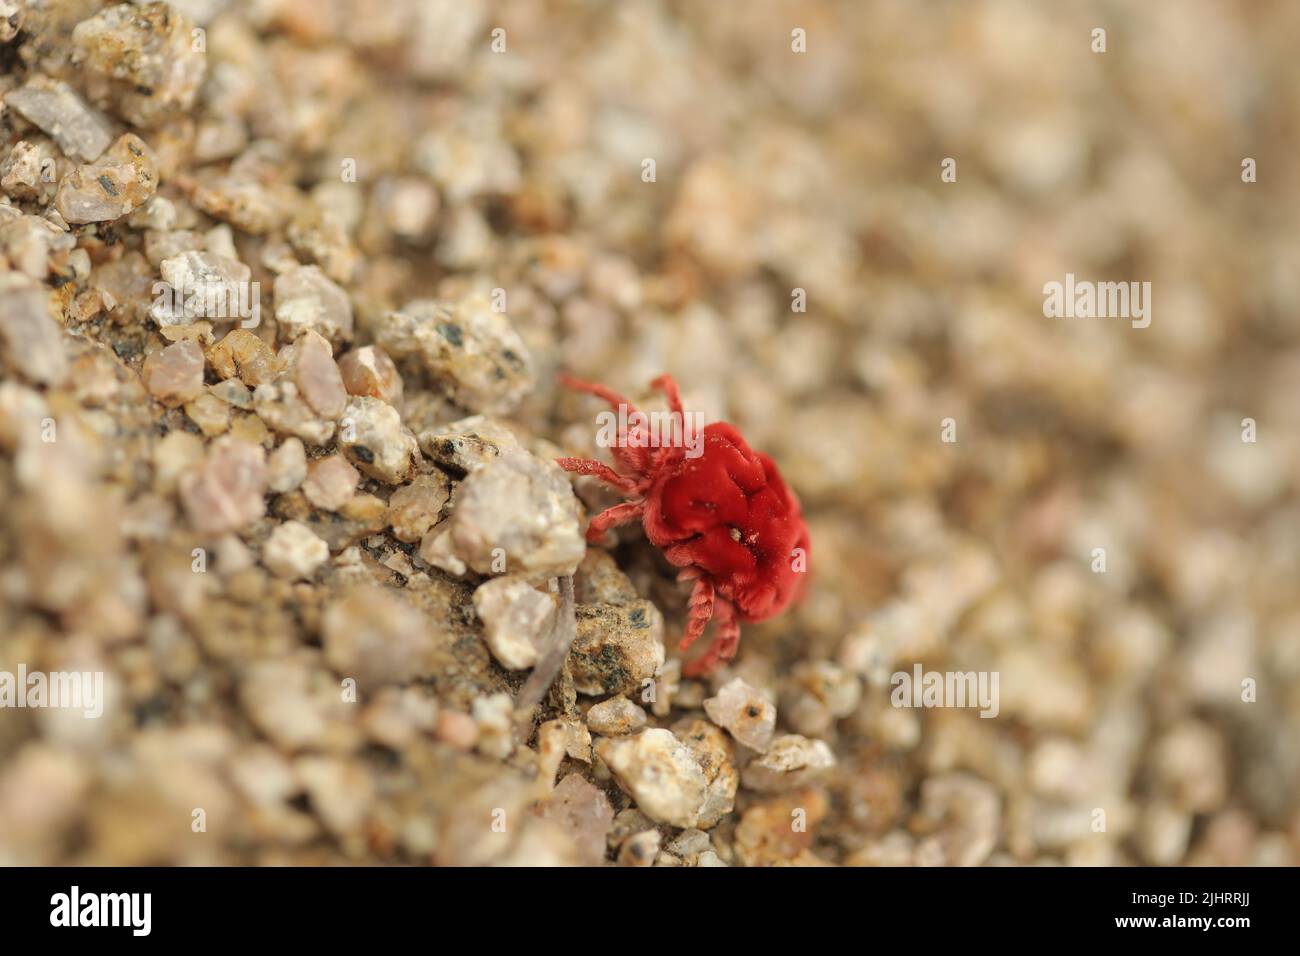 A closeup shot of a small red velvet mites crab crawling on tiny rocks in Narsapur forest Stock Photo